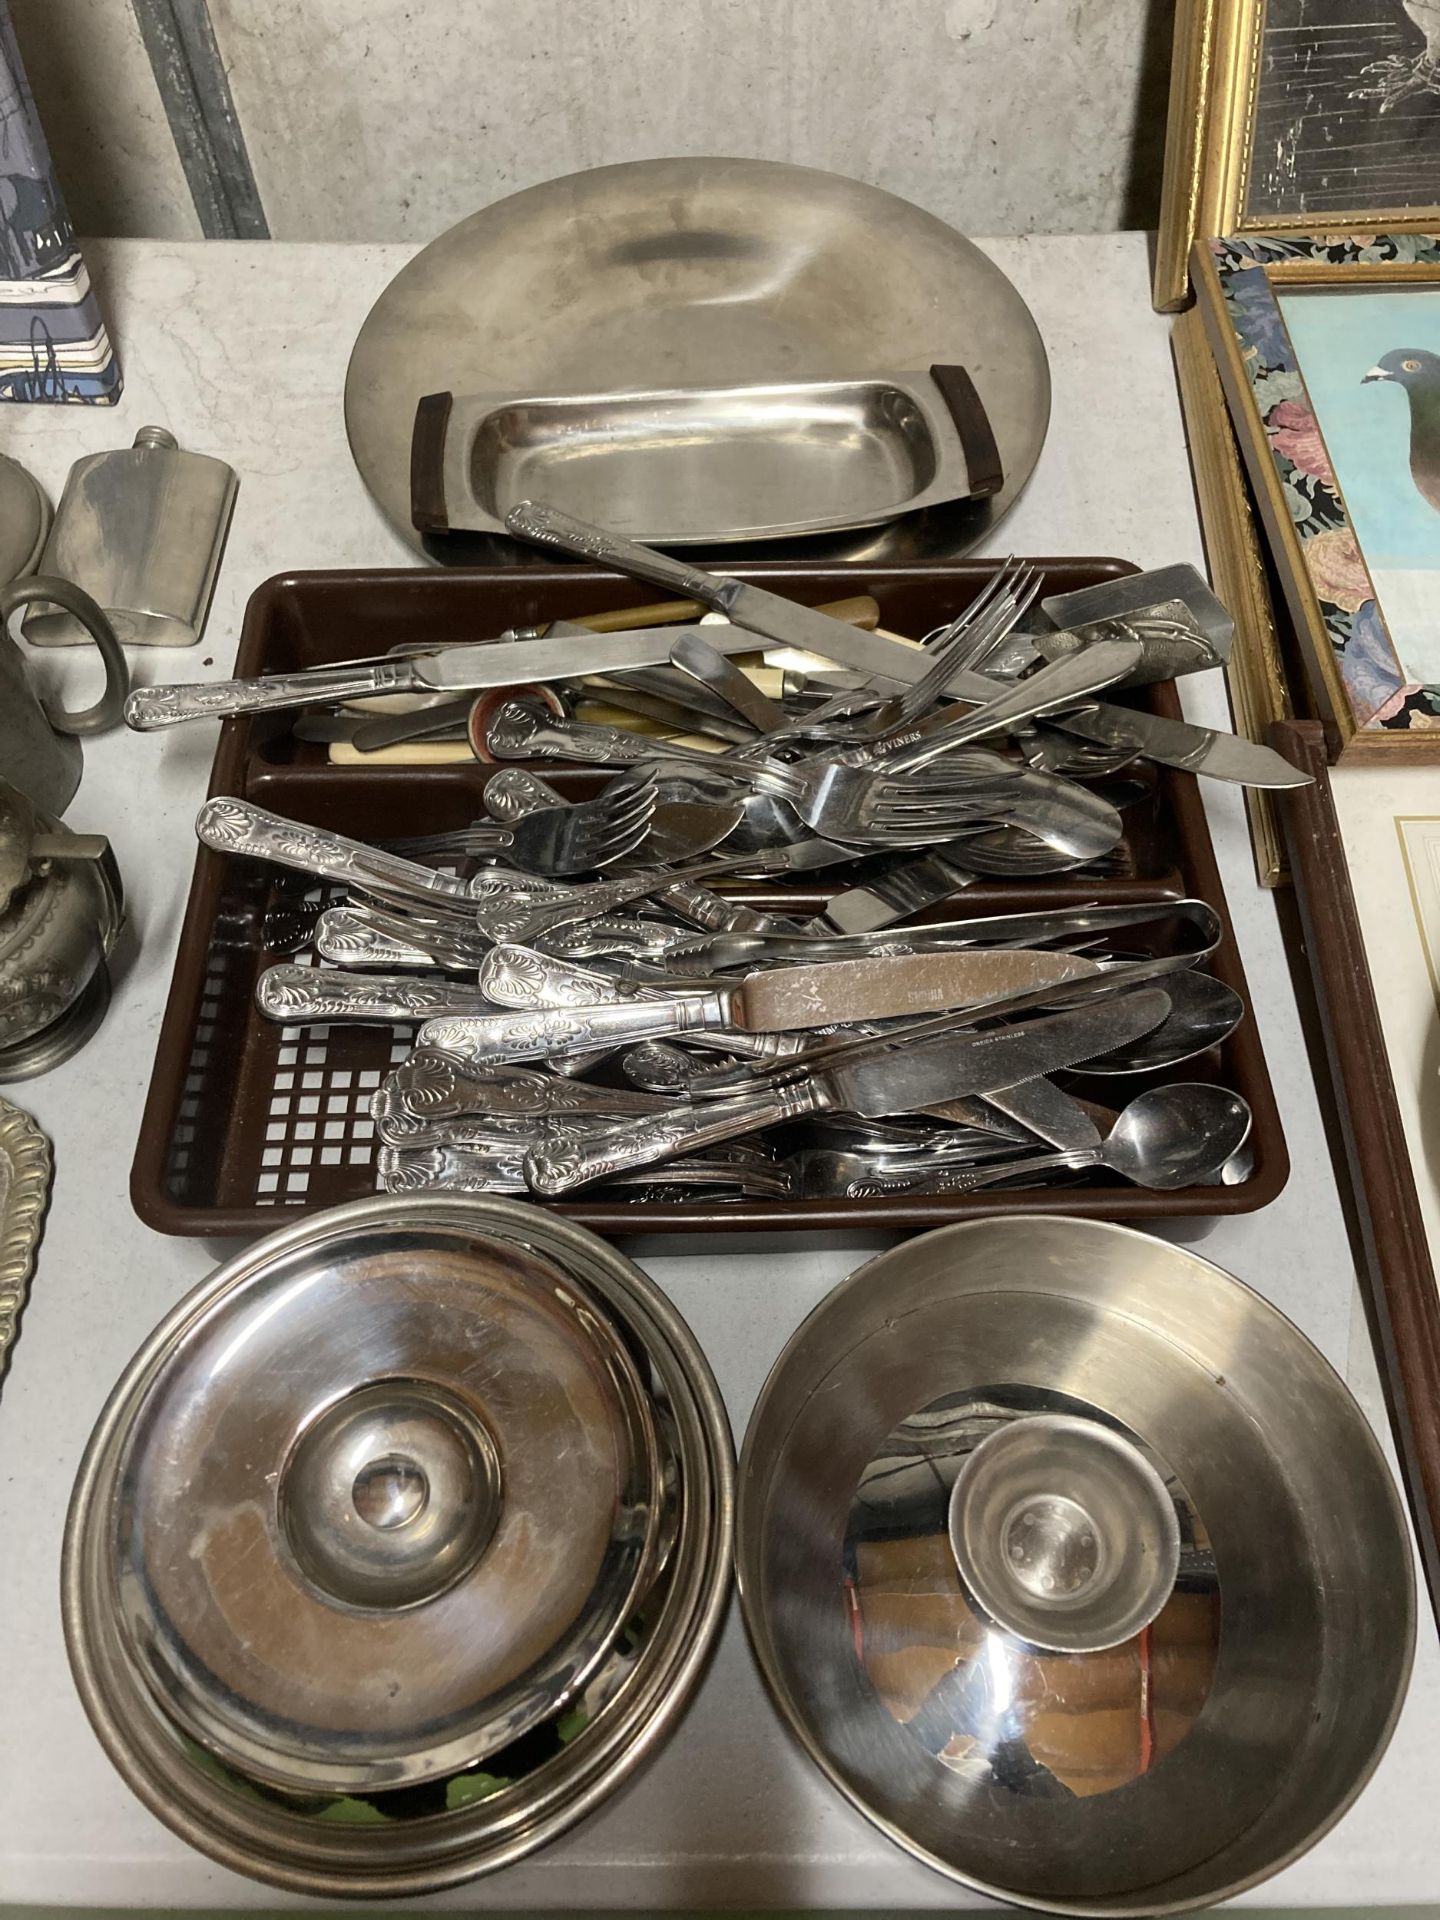 A GROUP OF SILVER PLATED FLATWARE AND STAINLESS STEEL DISHES